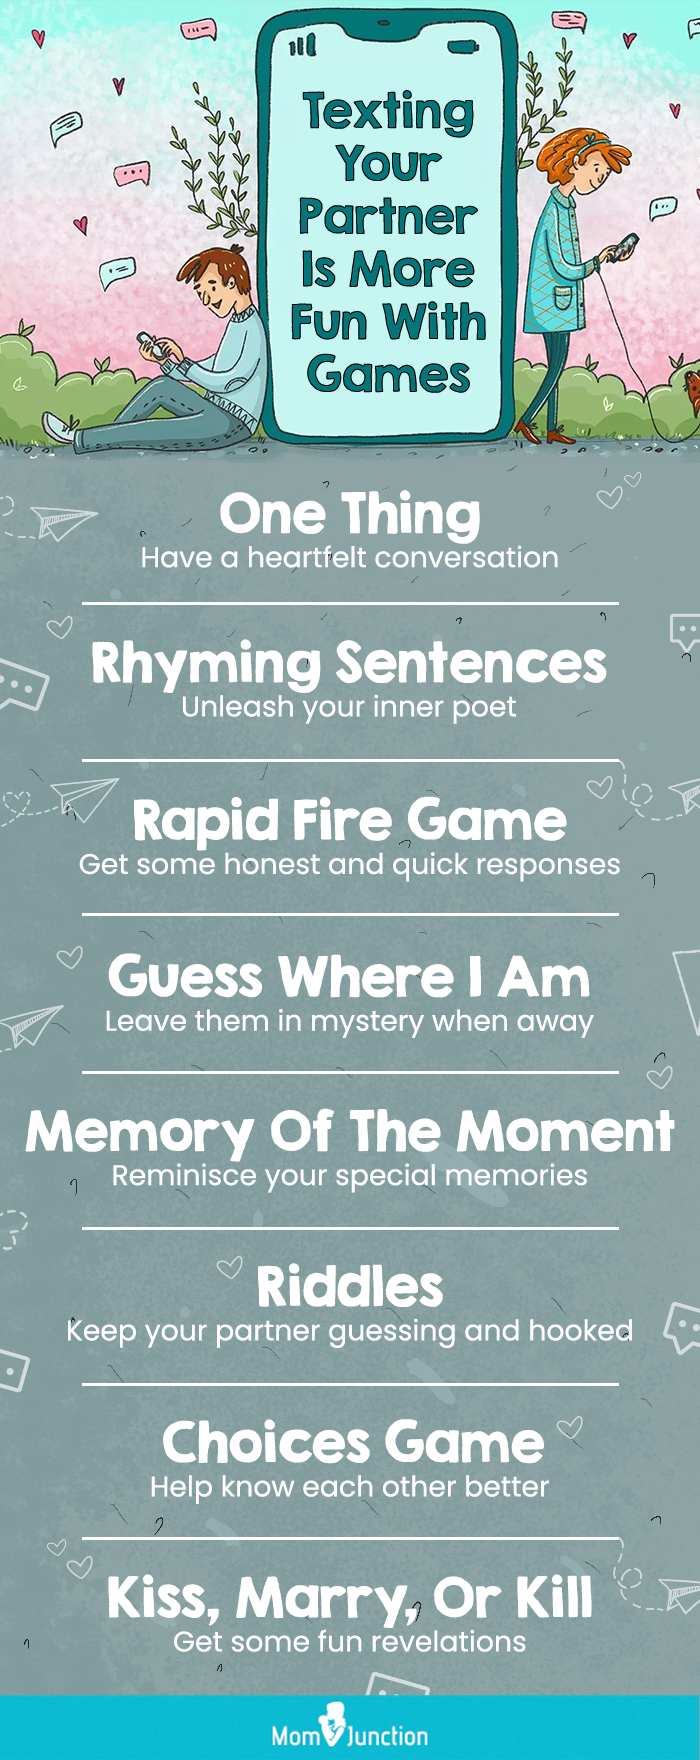 texting your partner is more fun with games (infographic)